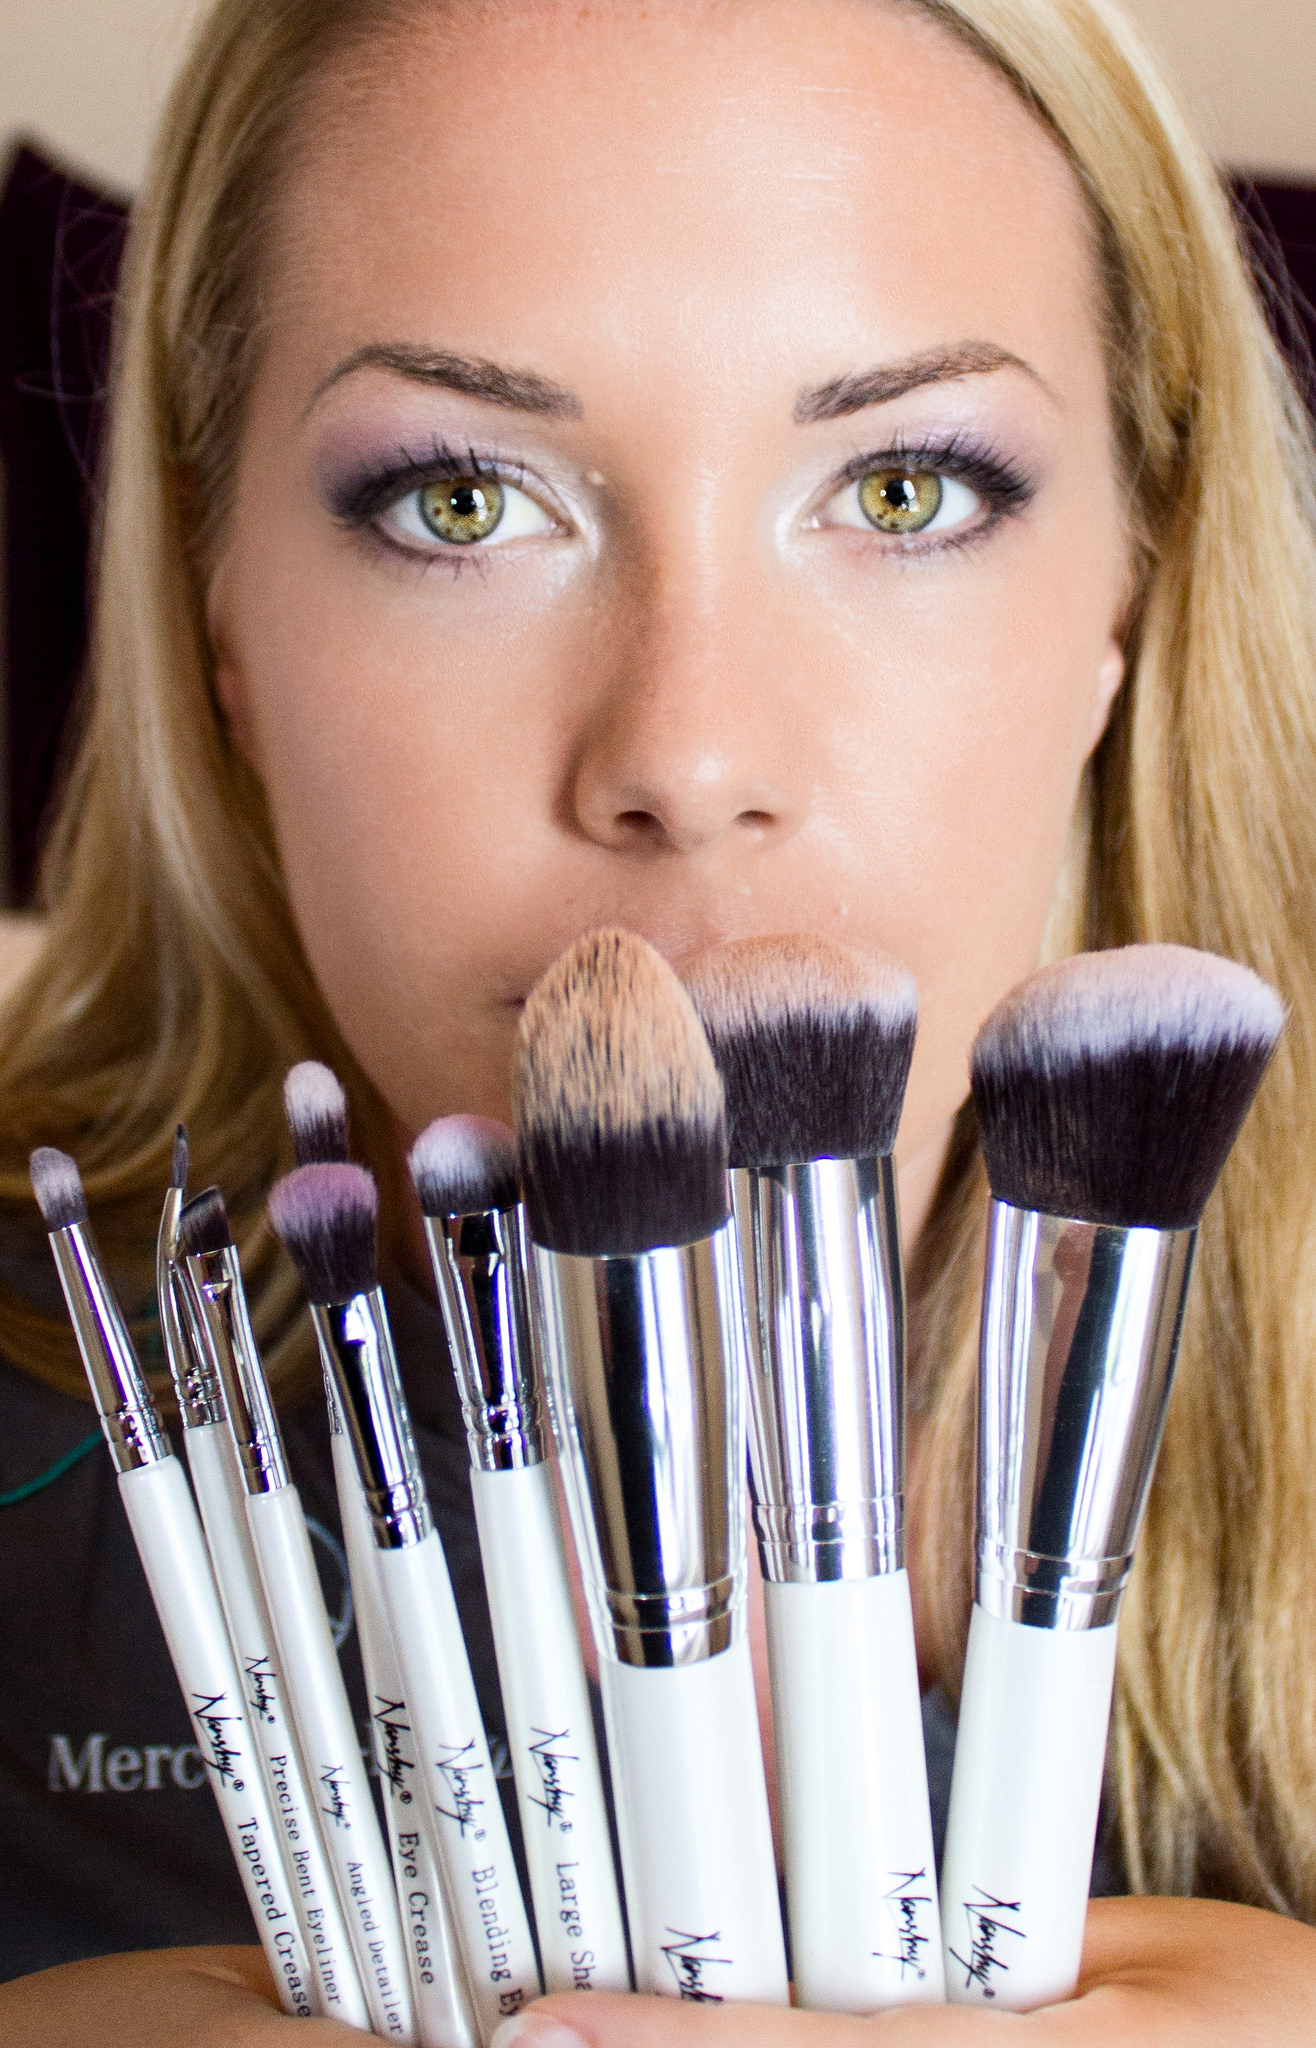 Your Top 7 Bad Makeup Habits That Need to Stop | Shop With Style